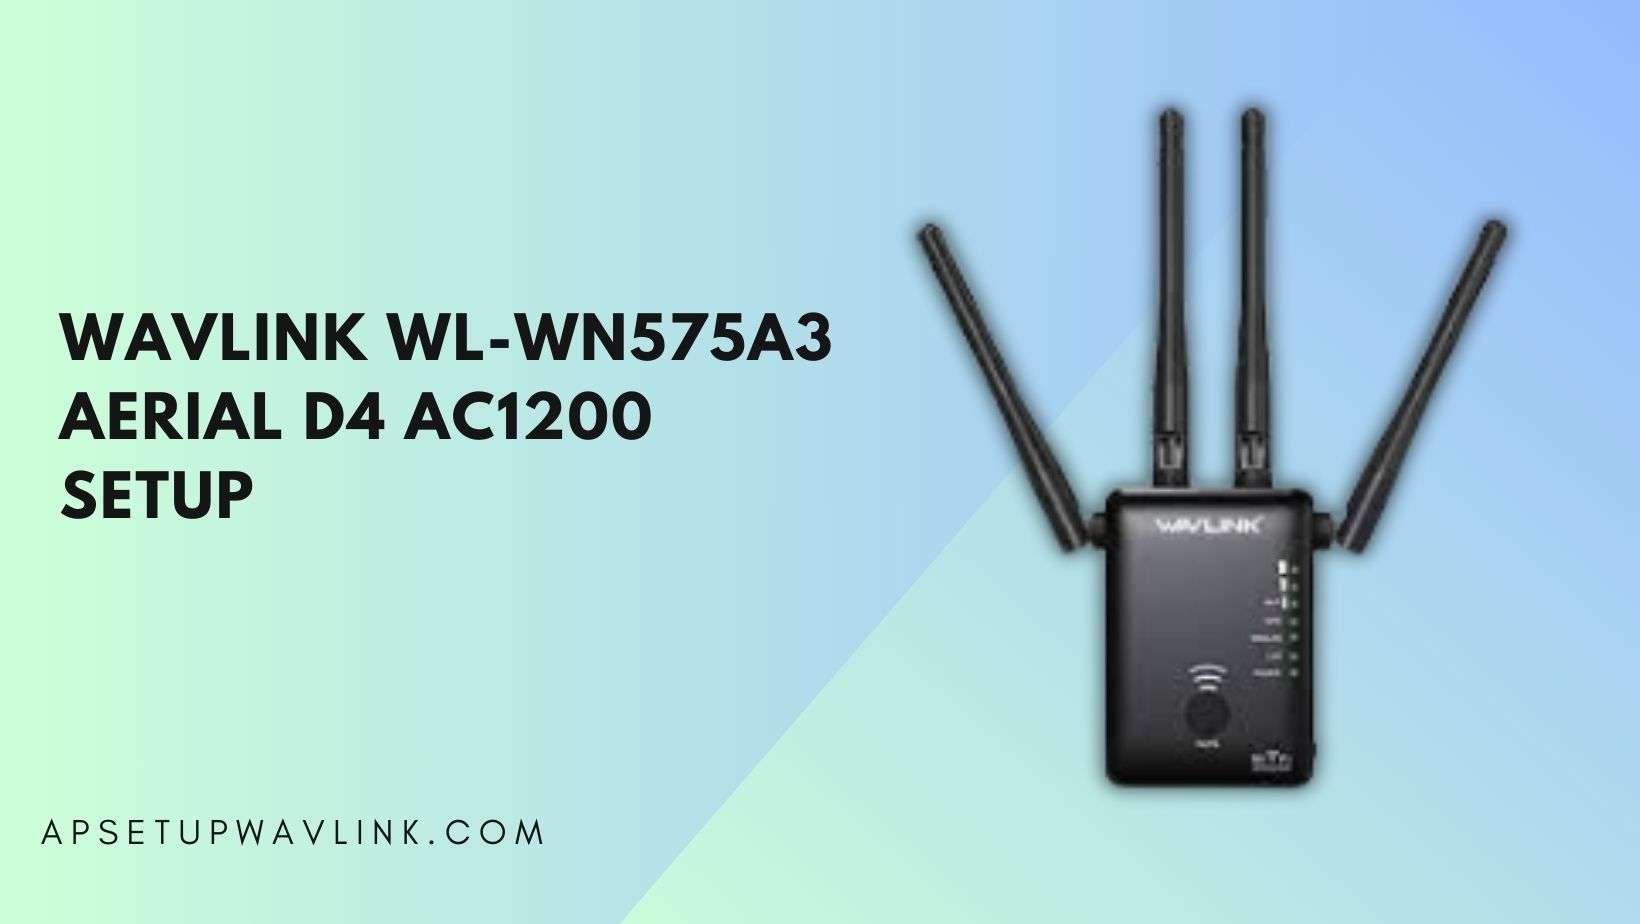 You are currently viewing Wavlink WL-WN575a3 Aerial D4 AC1200 Setup